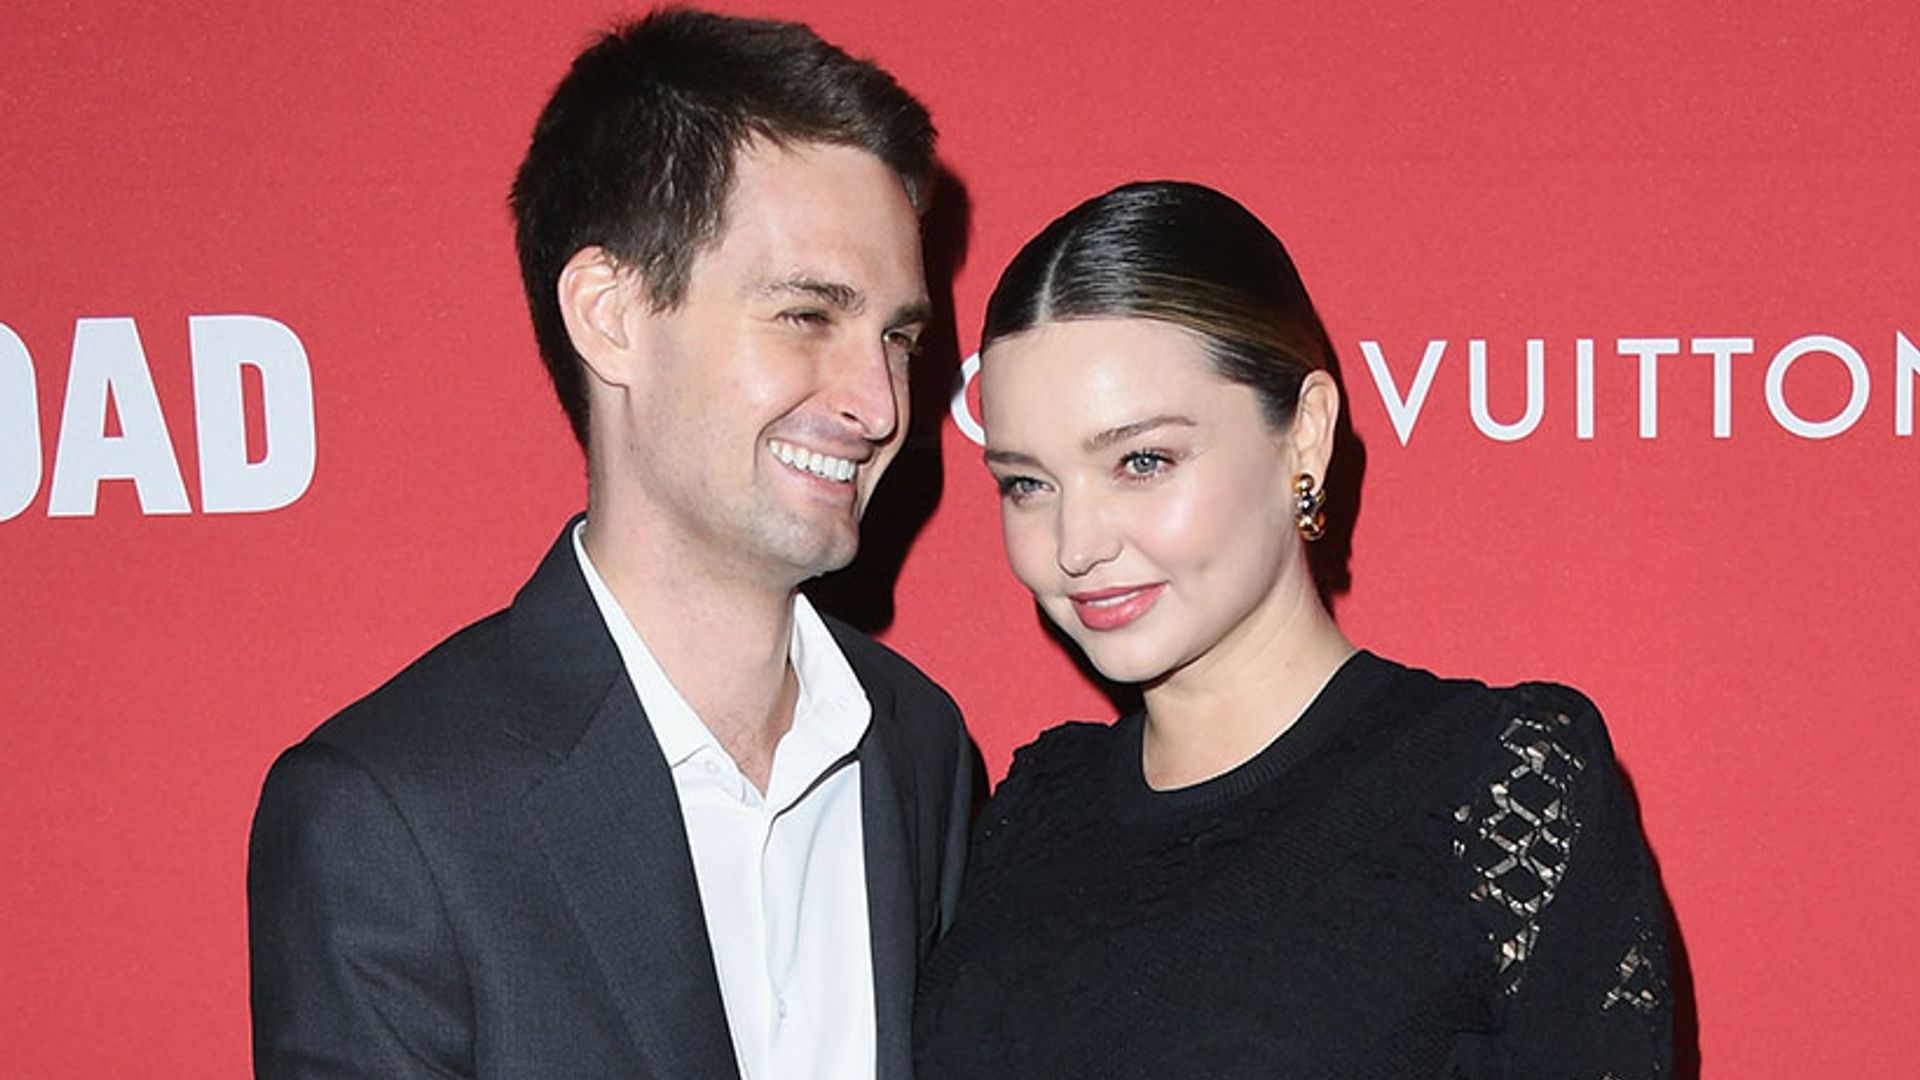 Miranda Kerr and Evan Spiegel welcome their first child together